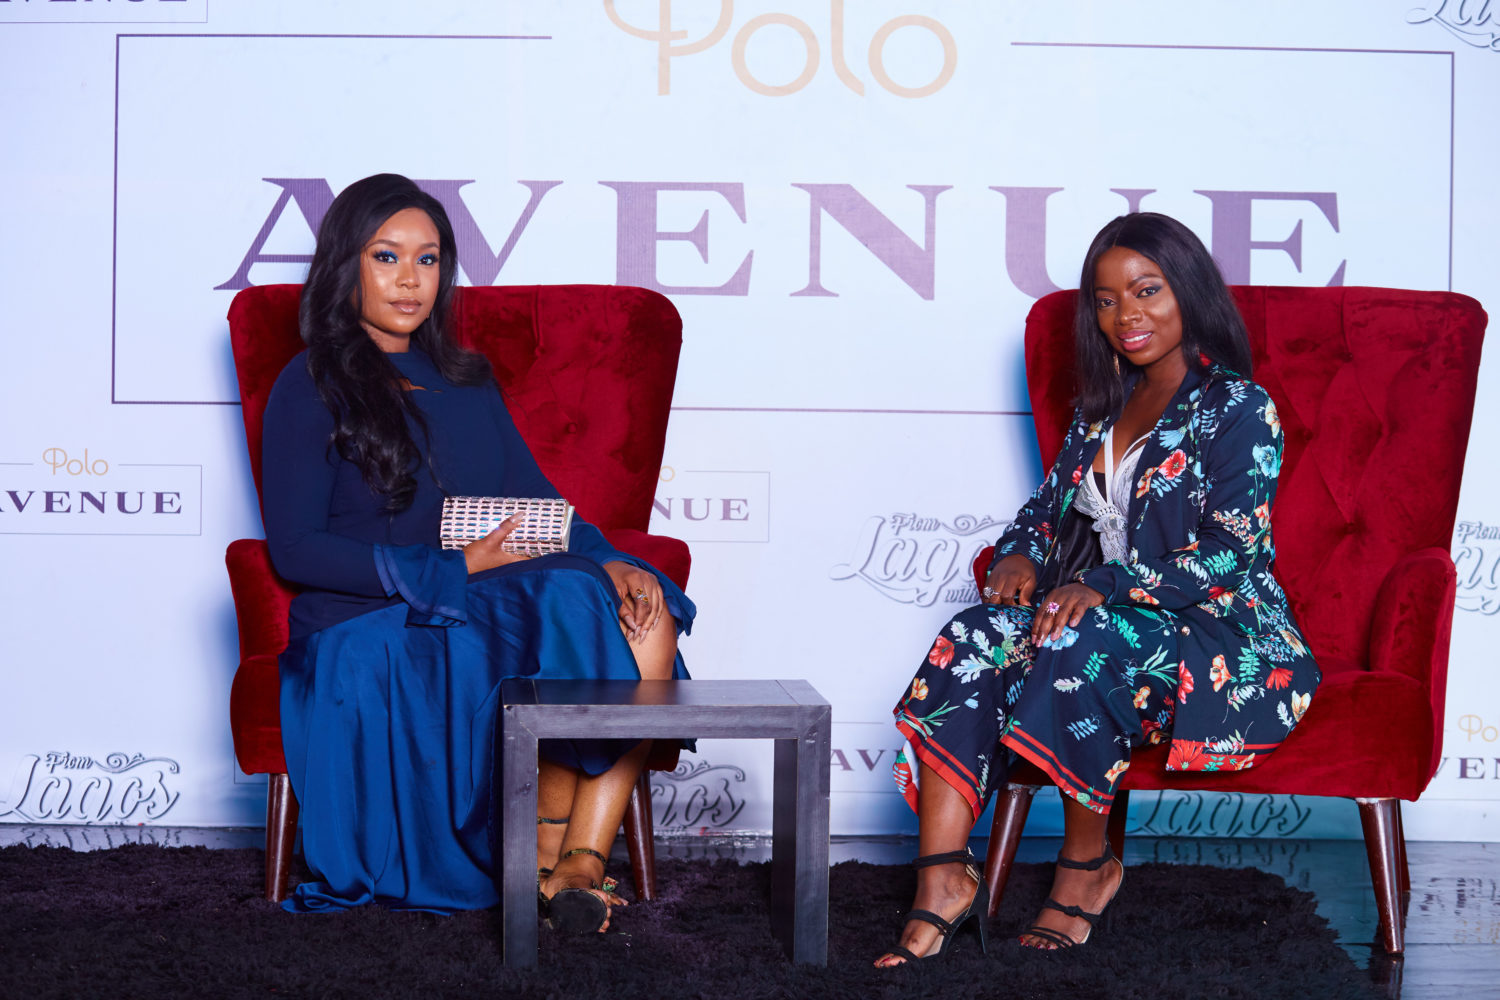 All the ‘From Lagos With Love’ Premiere Red Carpet Photos You Need to See